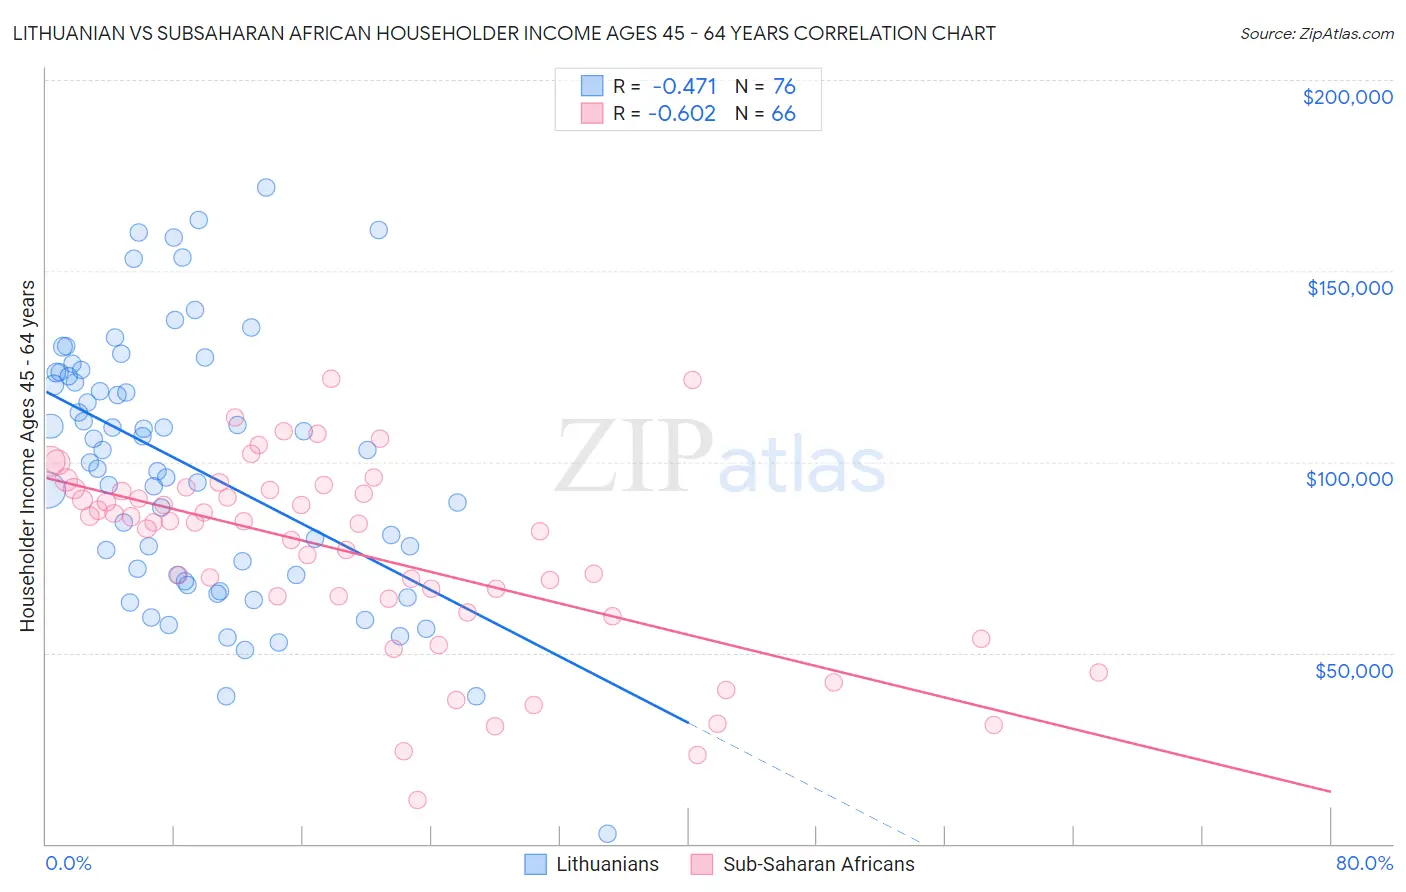 Lithuanian vs Subsaharan African Householder Income Ages 45 - 64 years